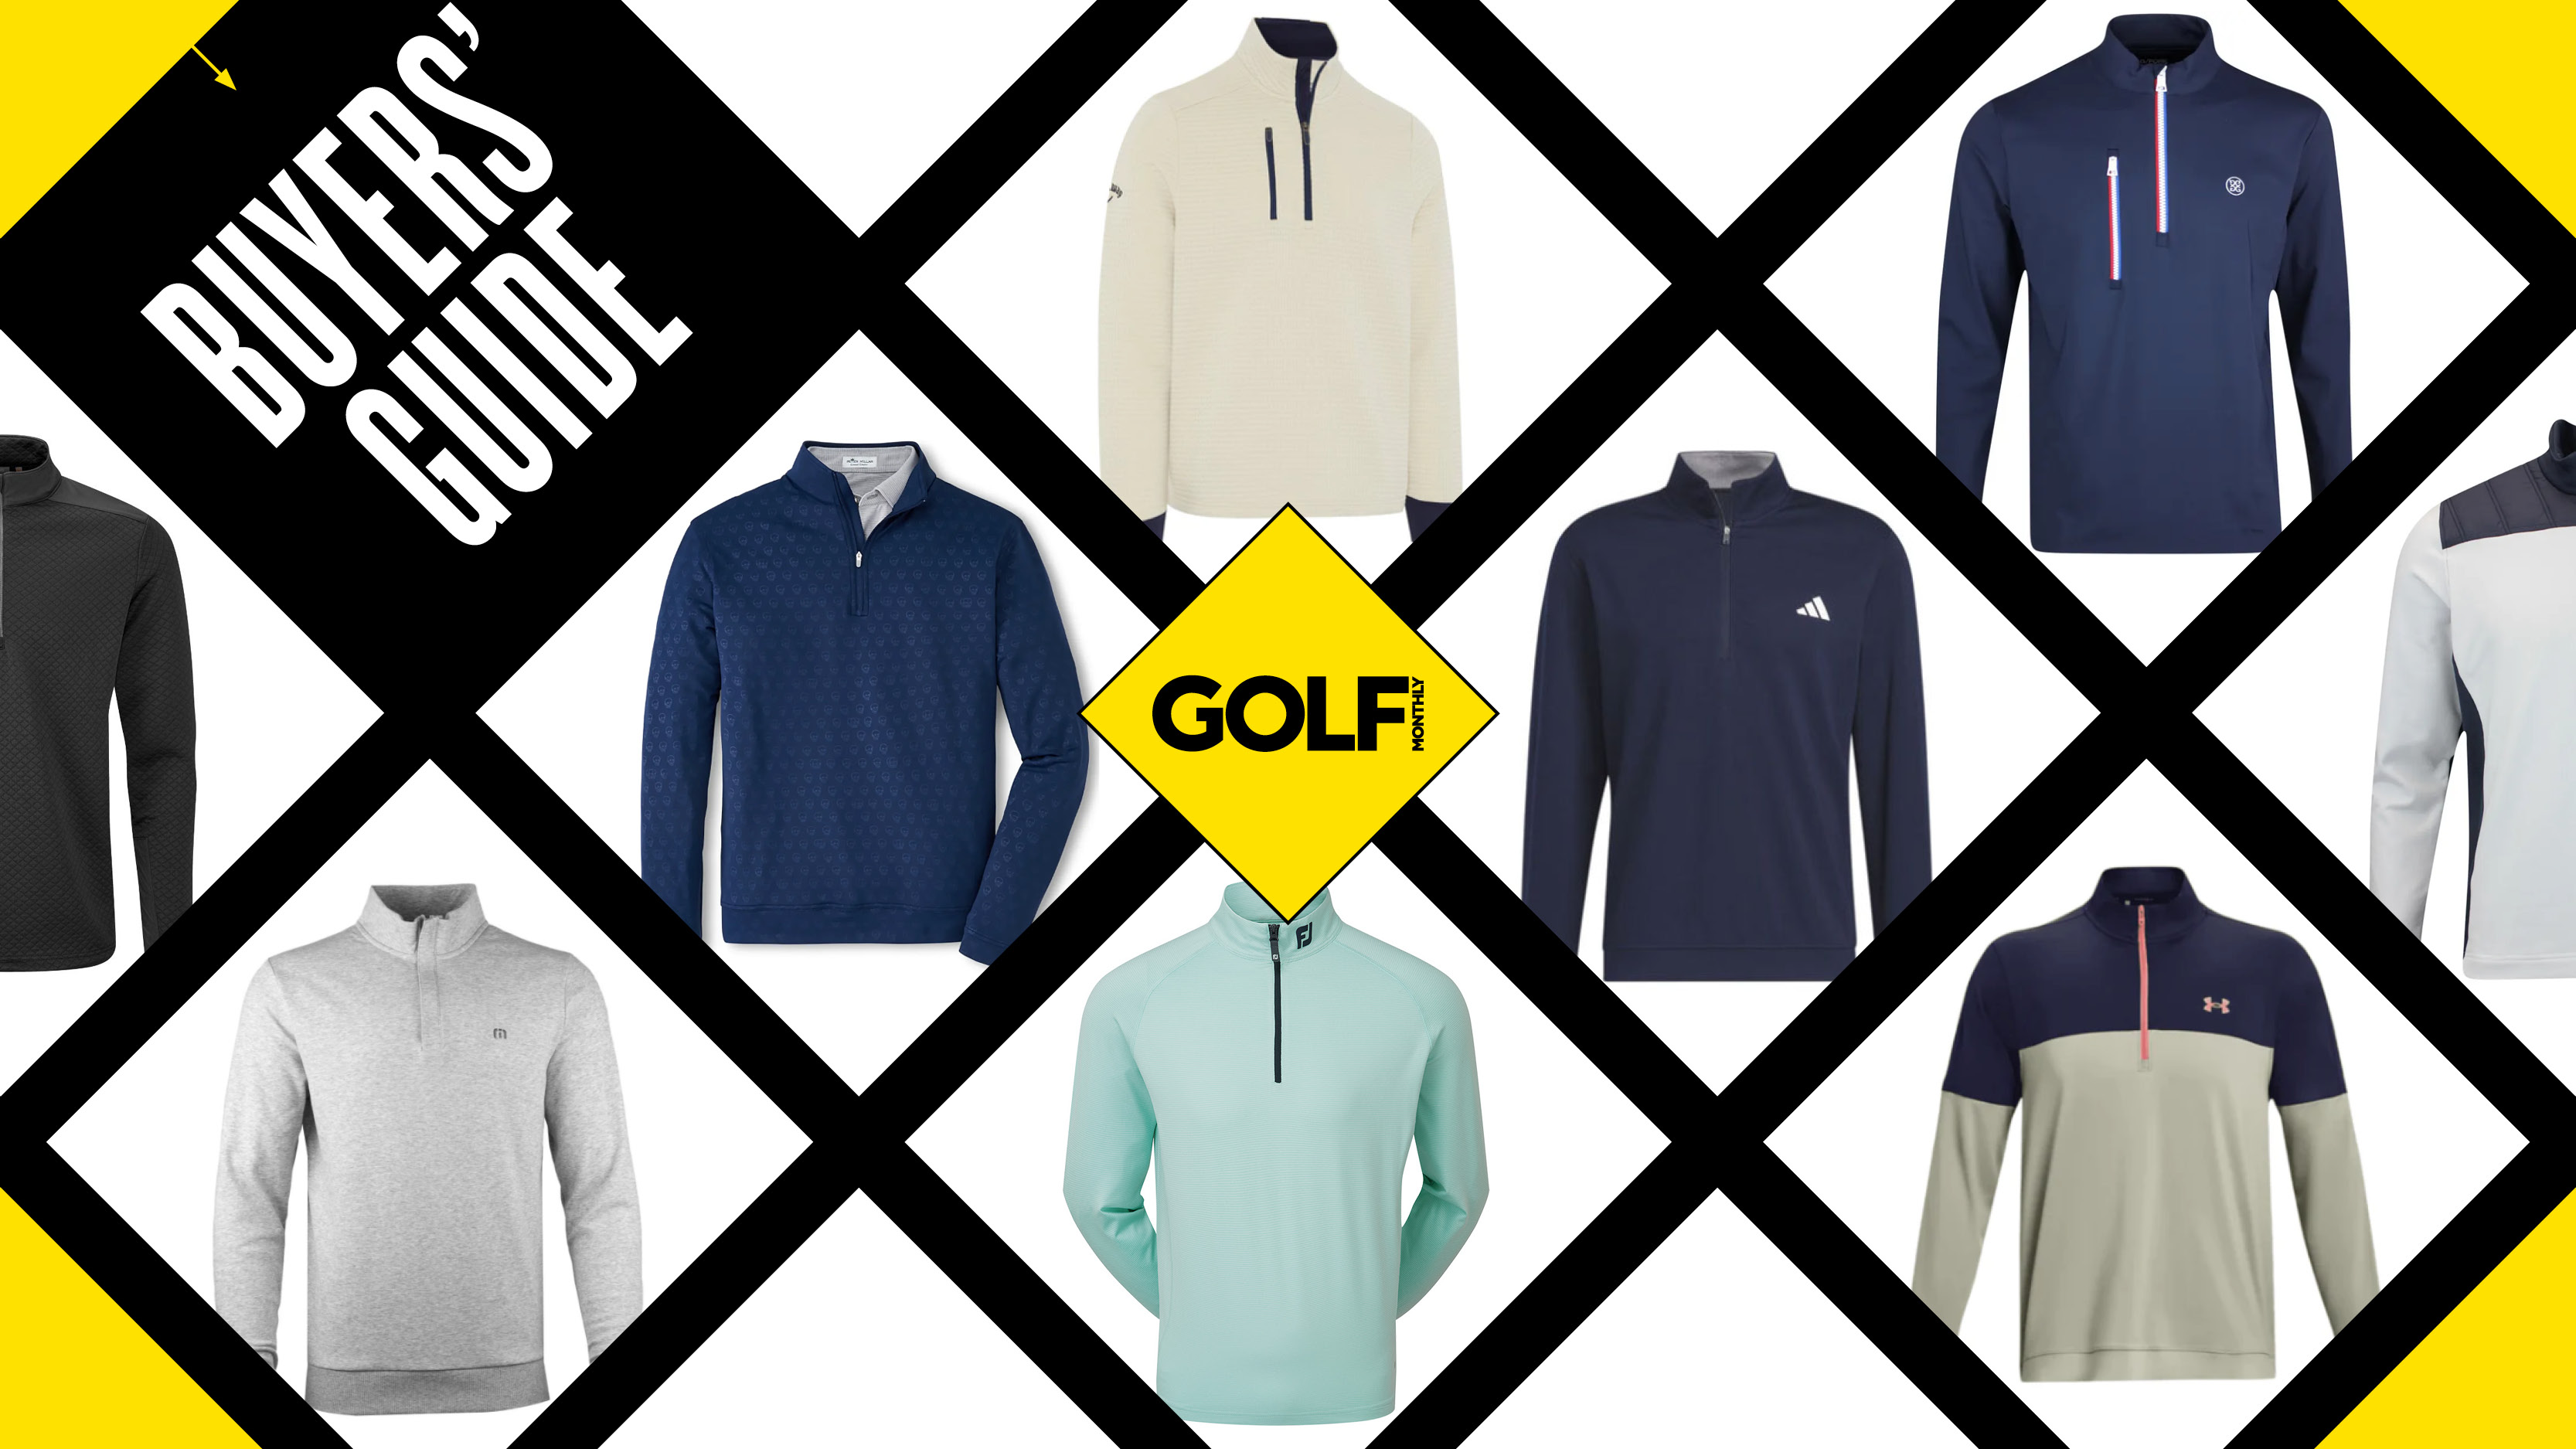 Golf outfits we'd also wear to happy hour